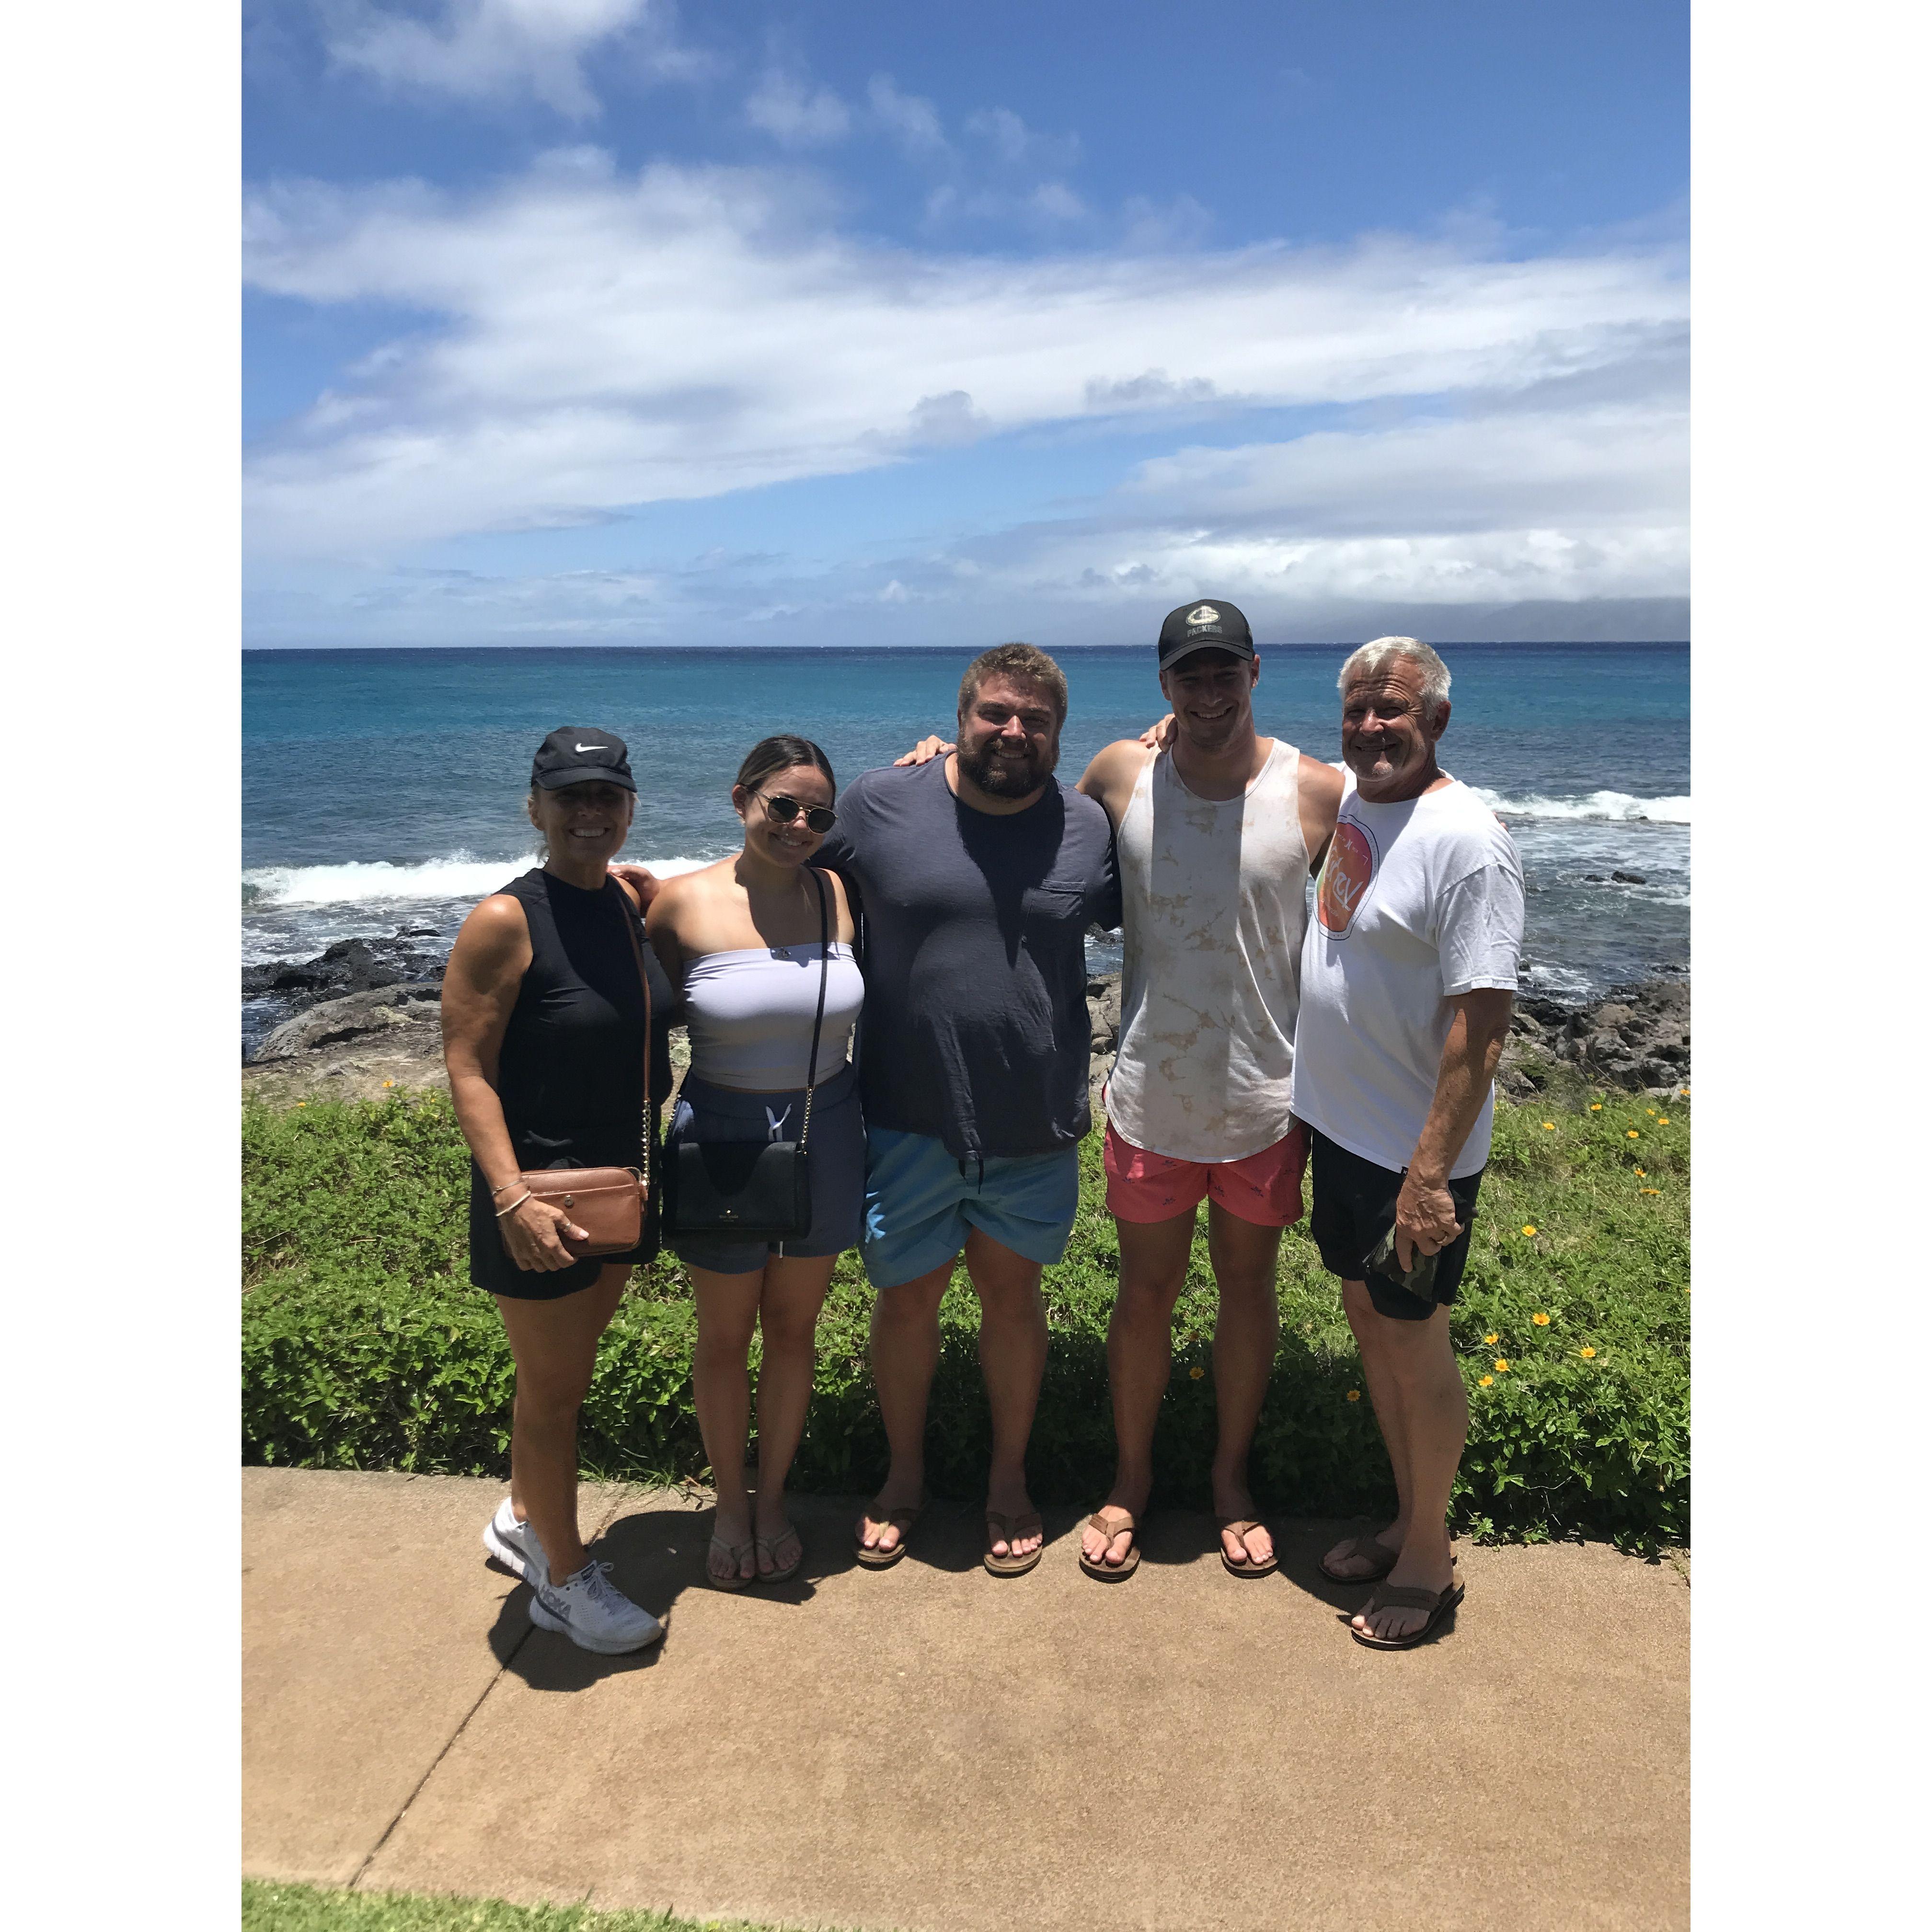 Hawaii with the Fortnum family!